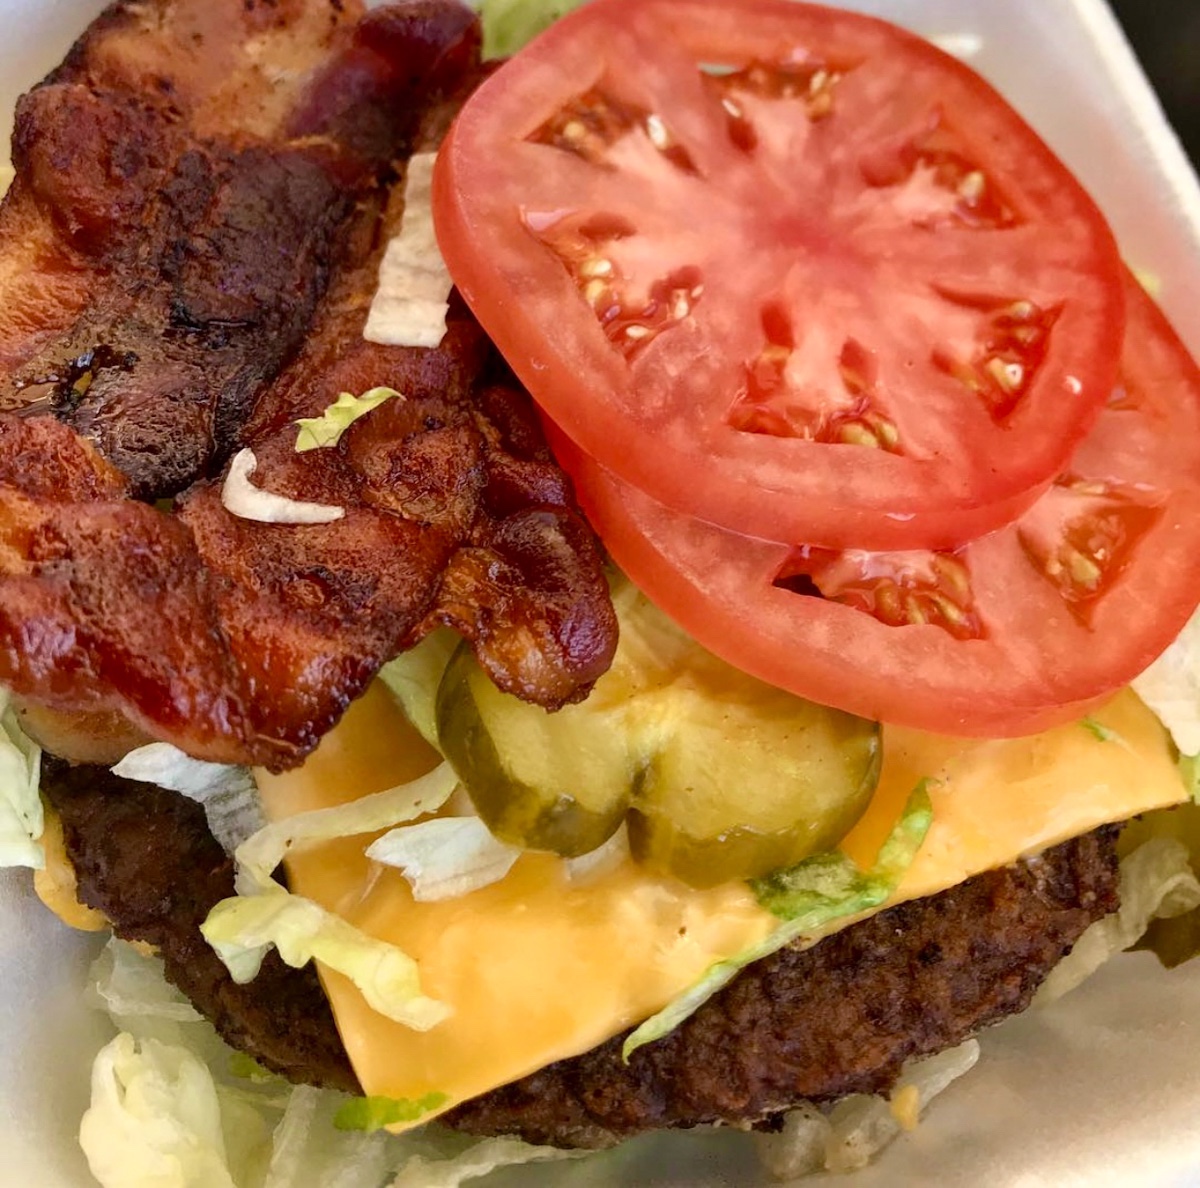 A bunless super sonic bacon double cheeseburger with tomato, pickle, lettuce and onions.